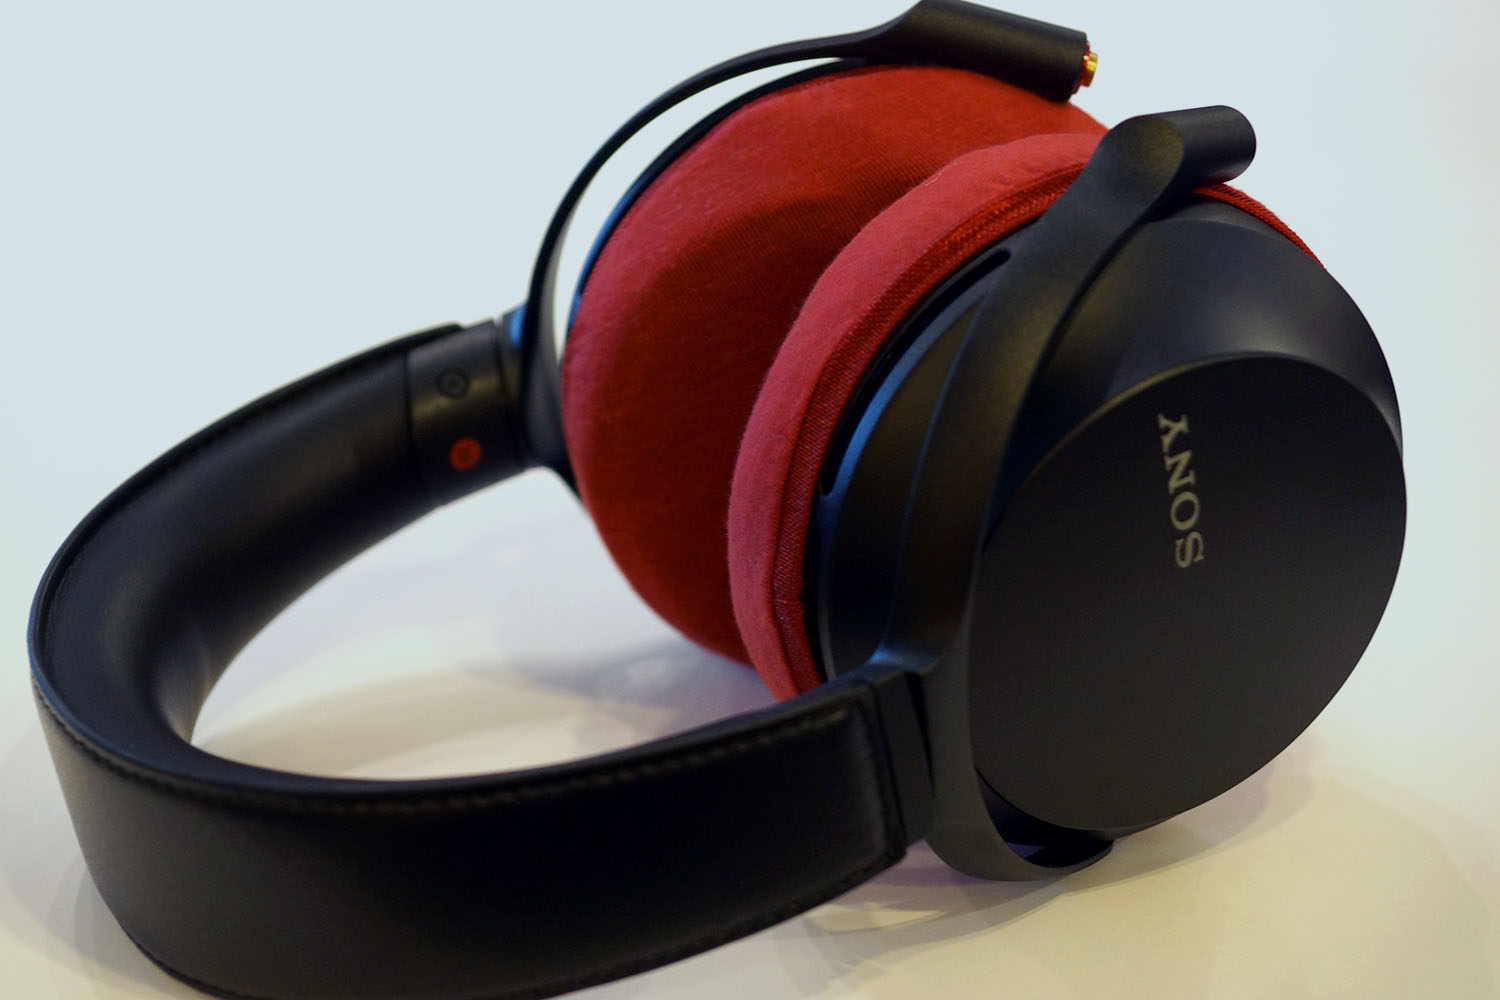 SONY MDR-Z7M2 earpad repair and protection: Super Stretch